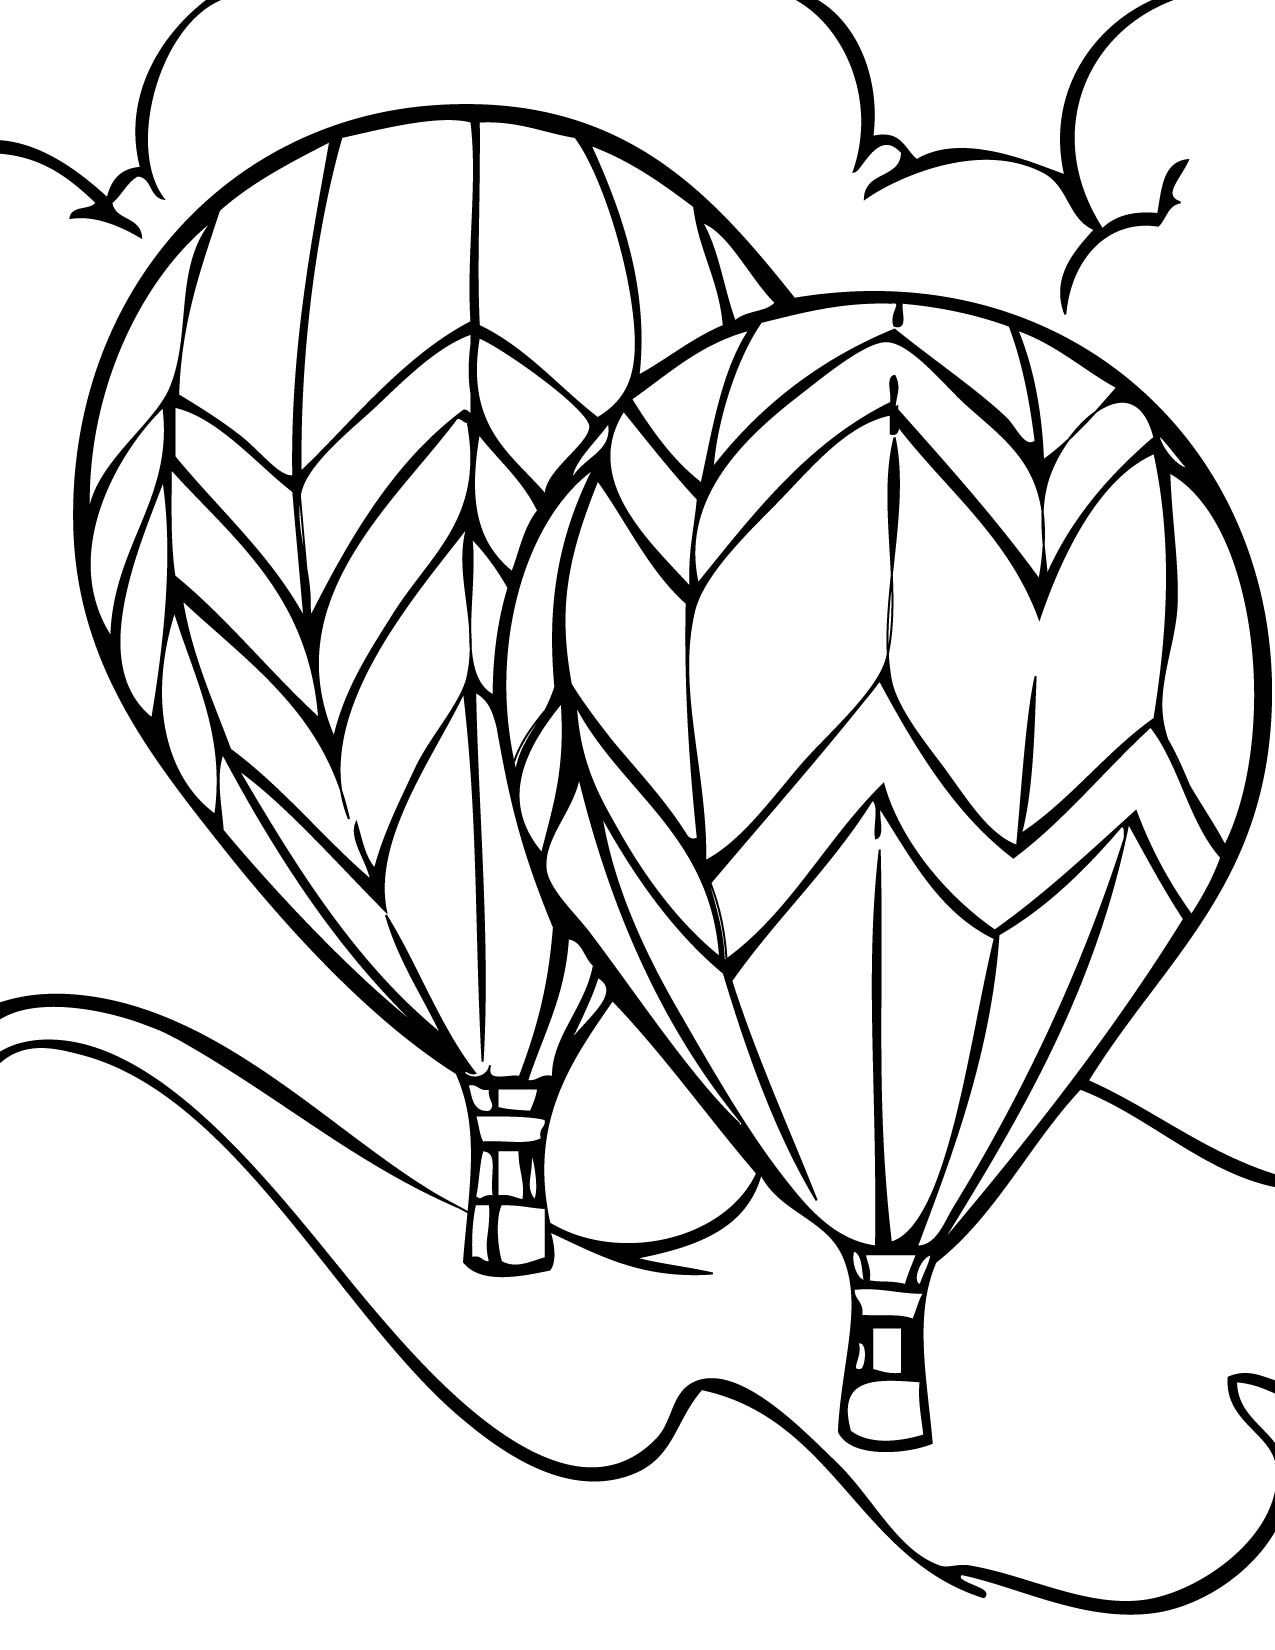 Hot air balloon black and white related hot air balloon coloring pages it.....